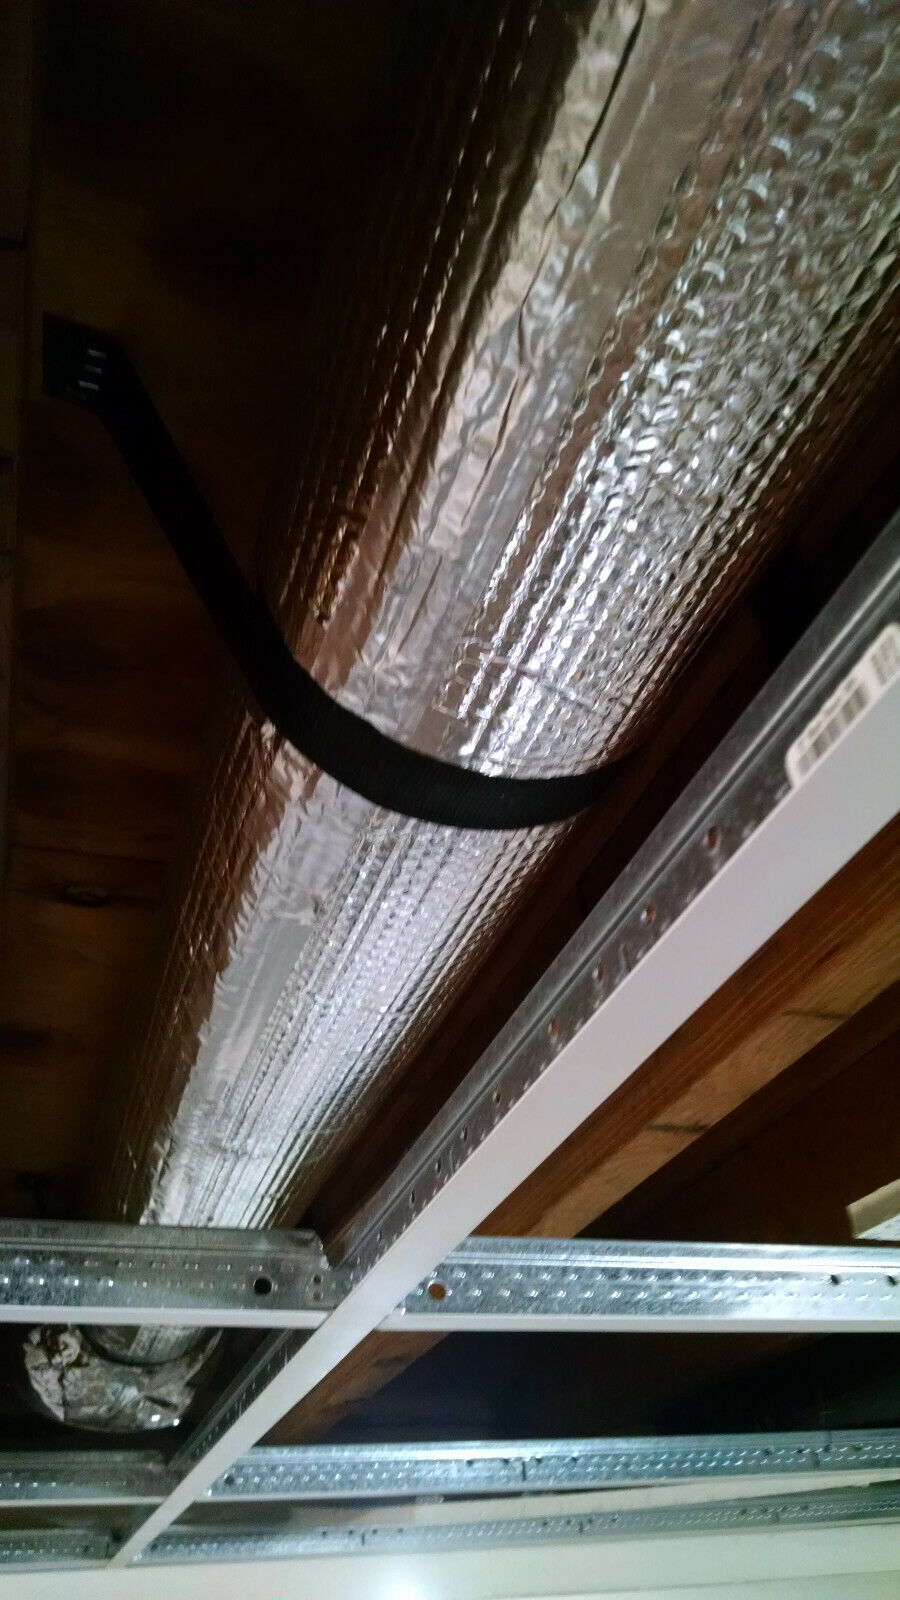 Duct Wrap Insulation 1.2 Metres Wide by 50 Metres Long